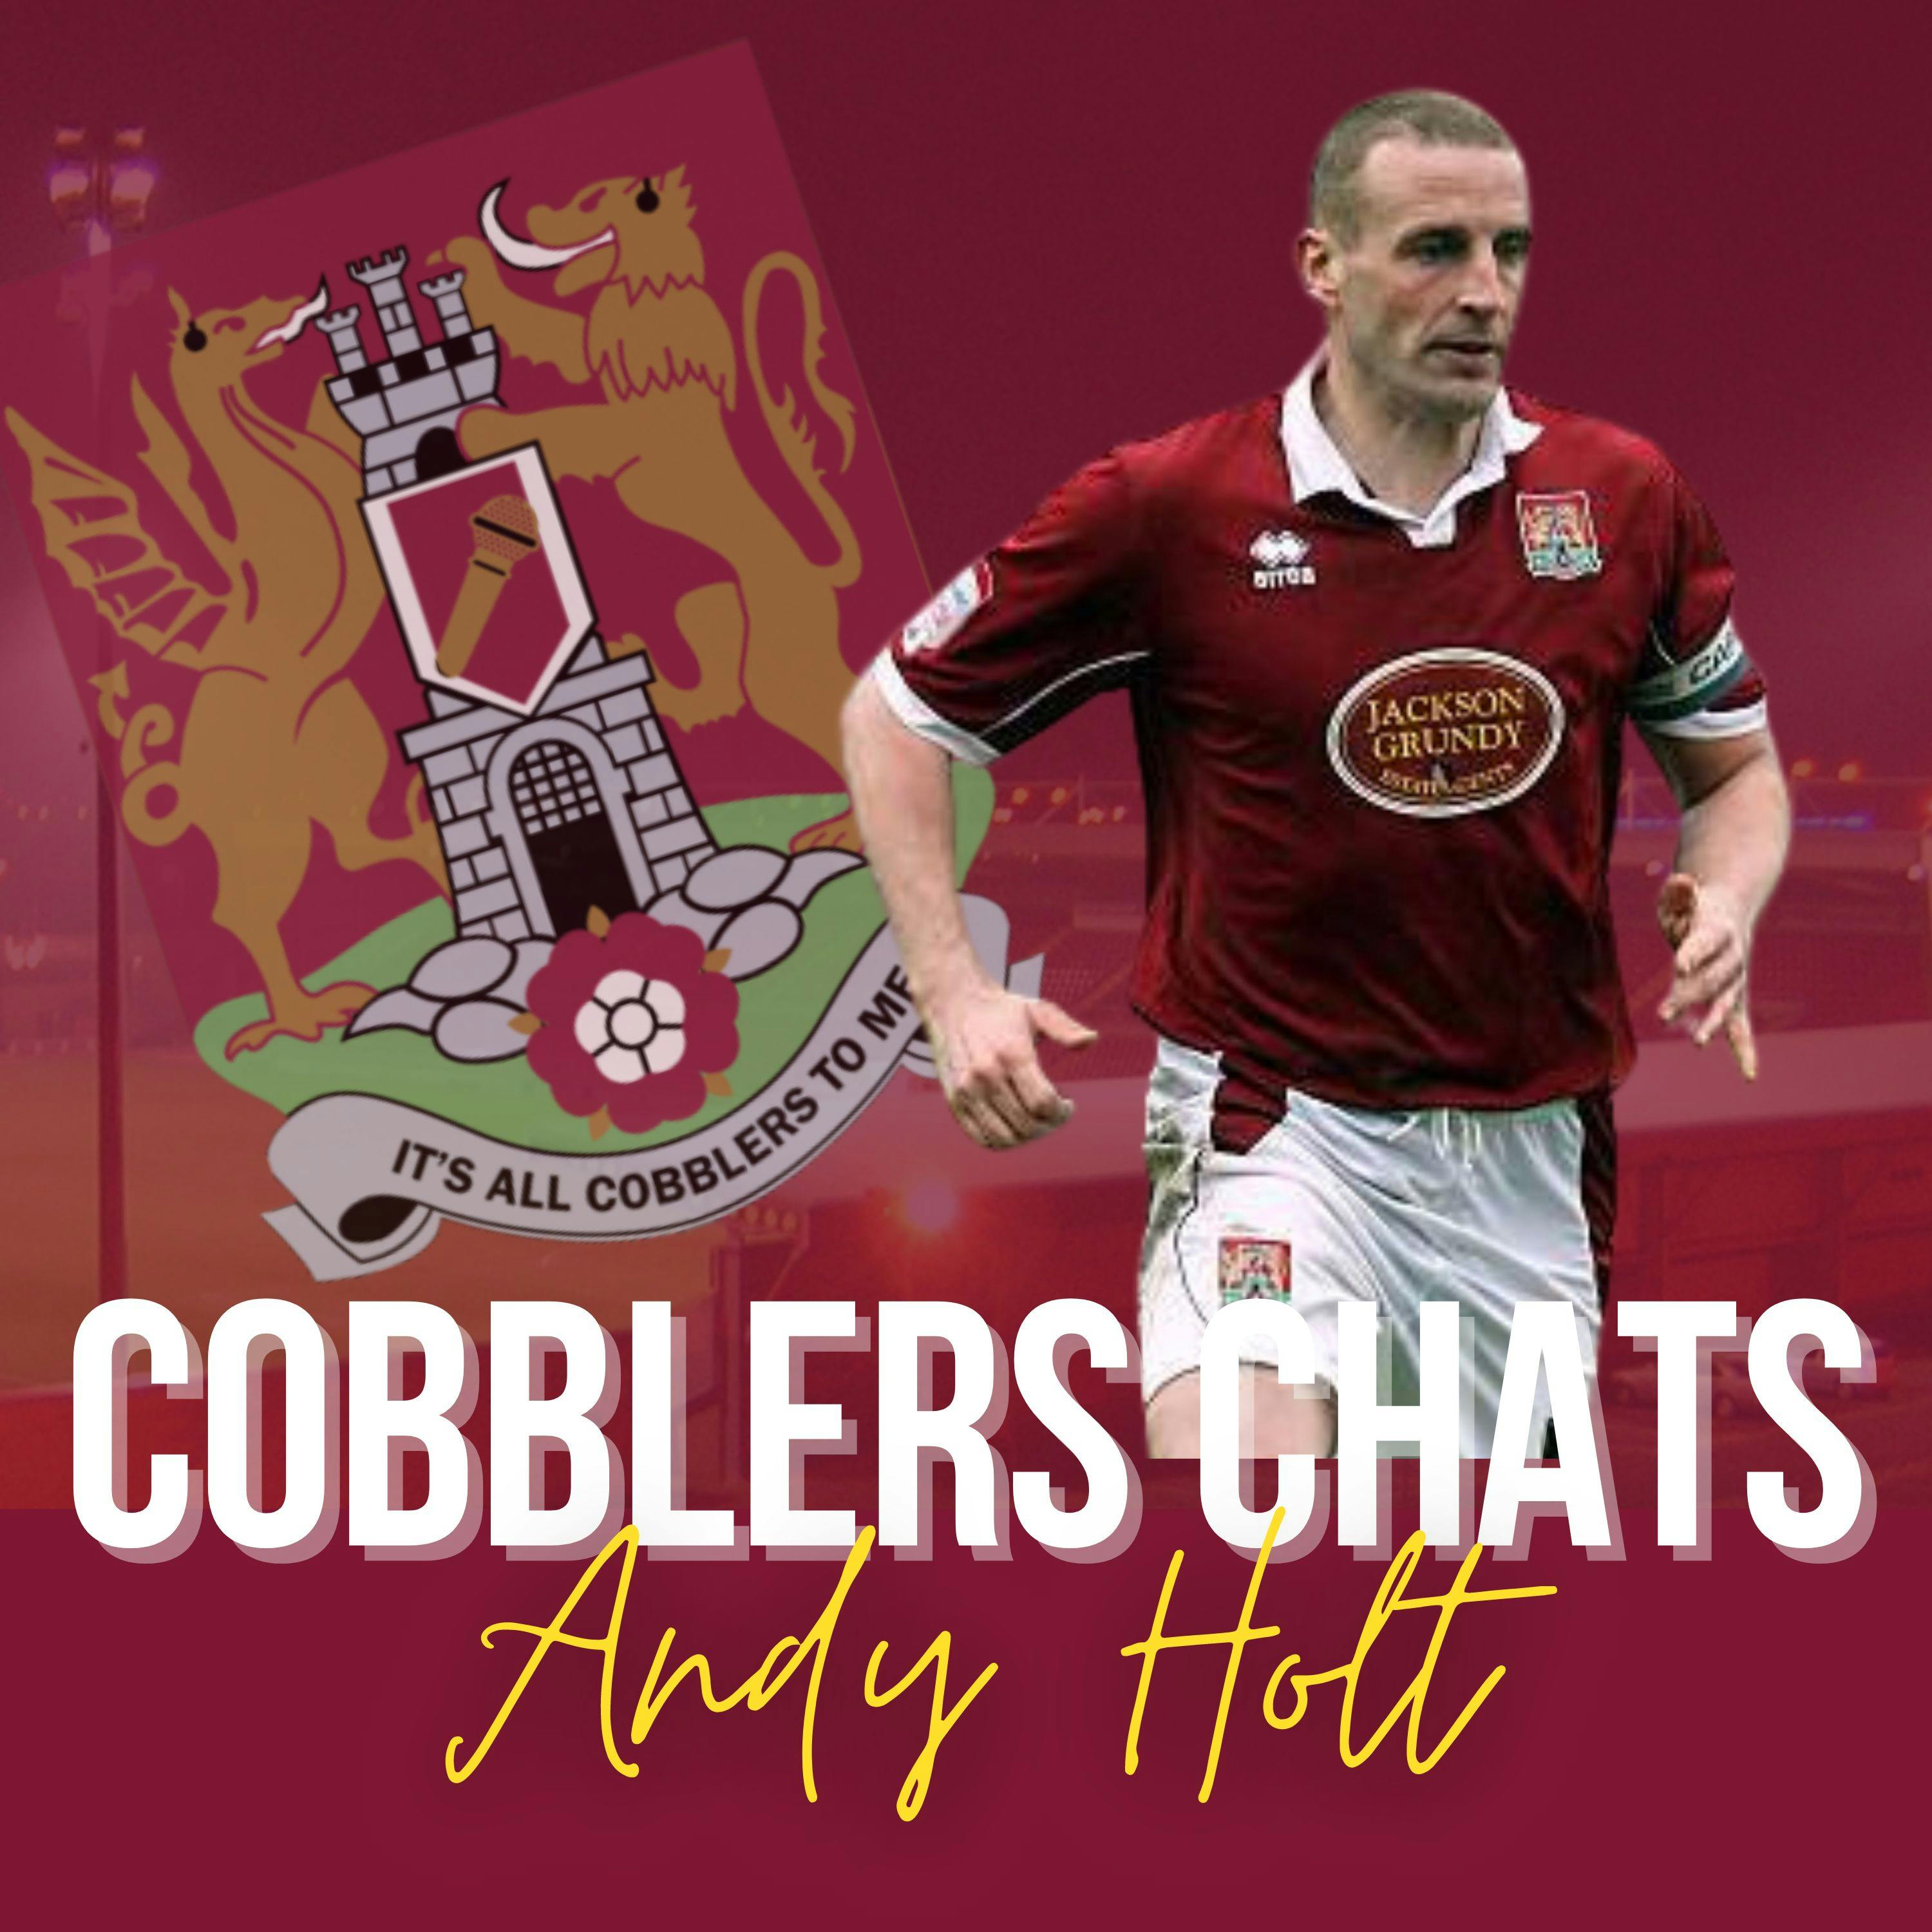 Cobblers Chats: Andy Holt